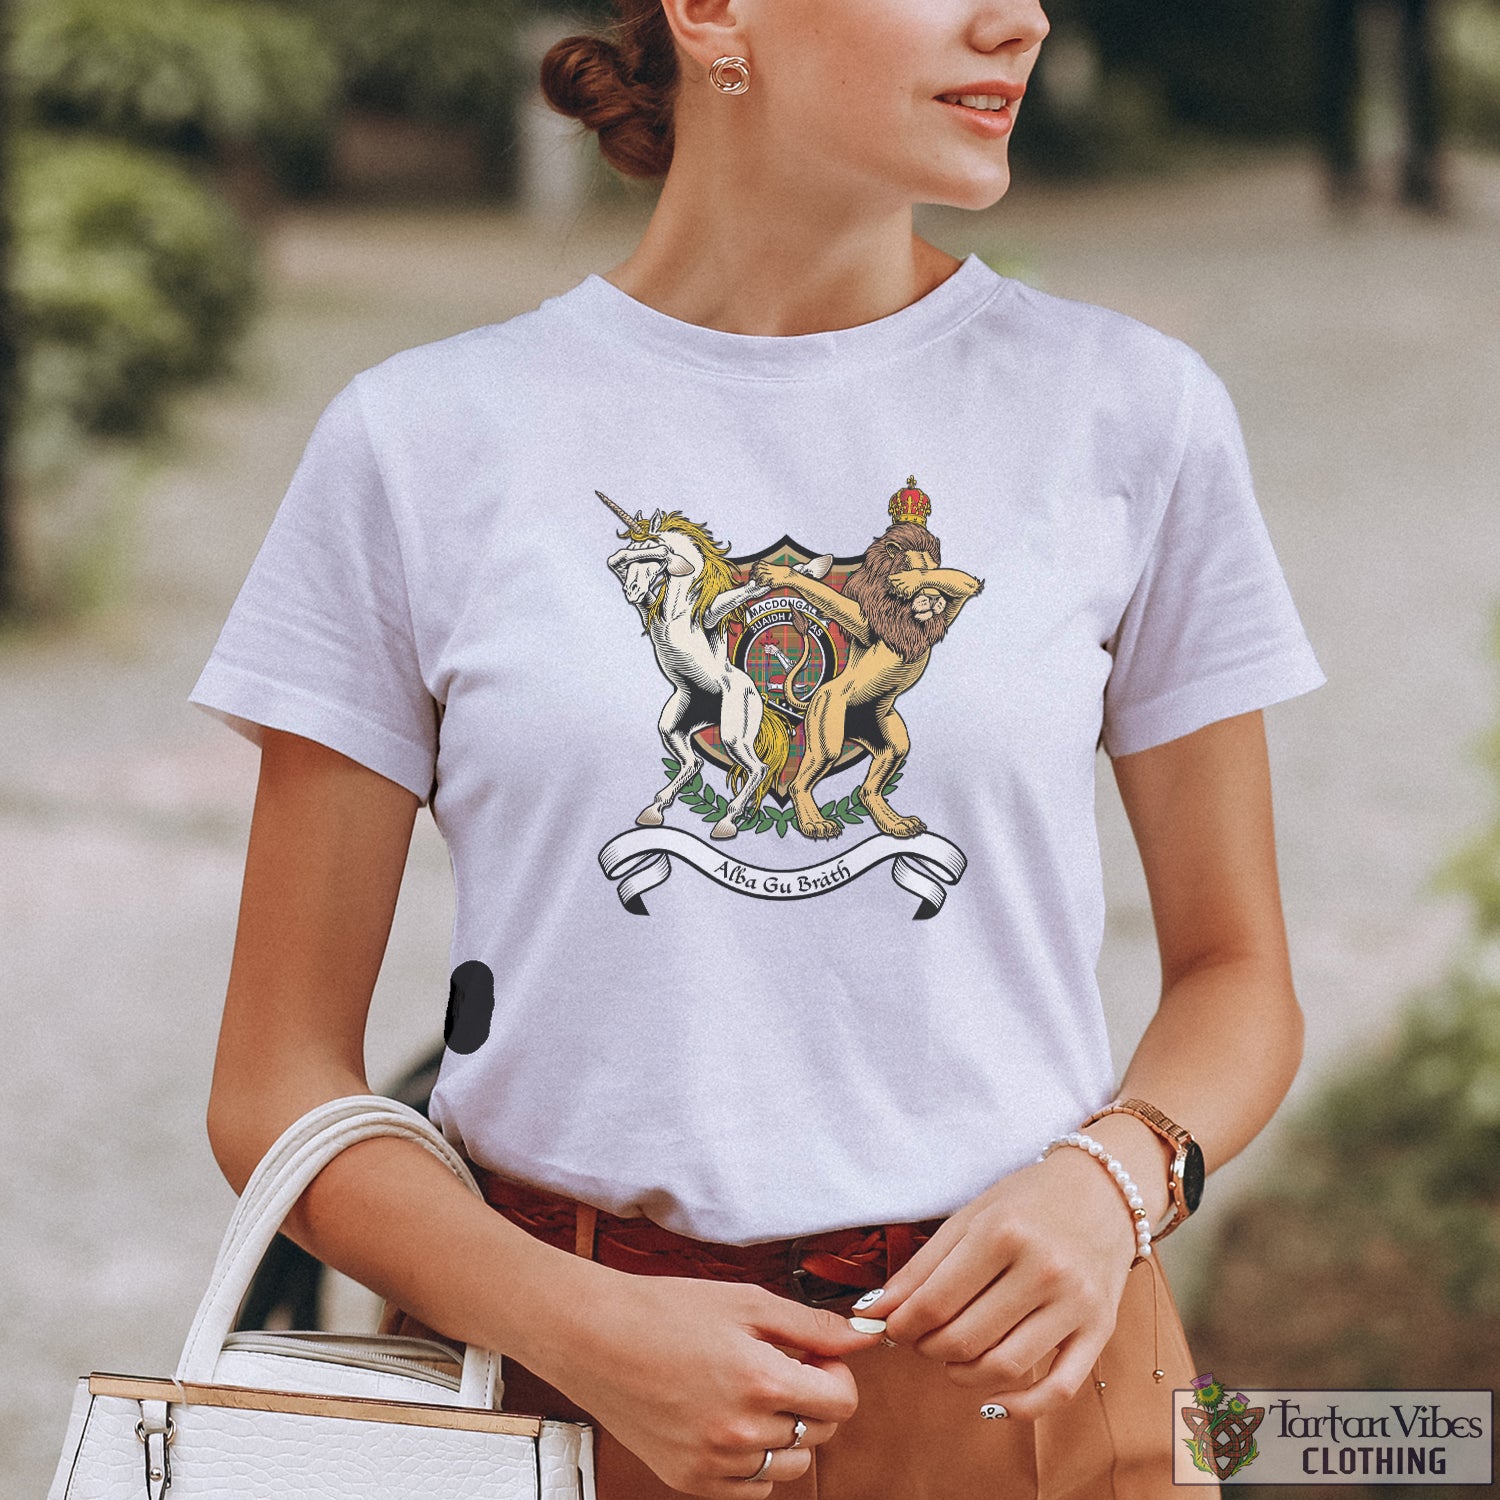 Tartan Vibes Clothing MacDougall Ancient Family Crest Cotton Women's T-Shirt with Scotland Royal Coat Of Arm Funny Style